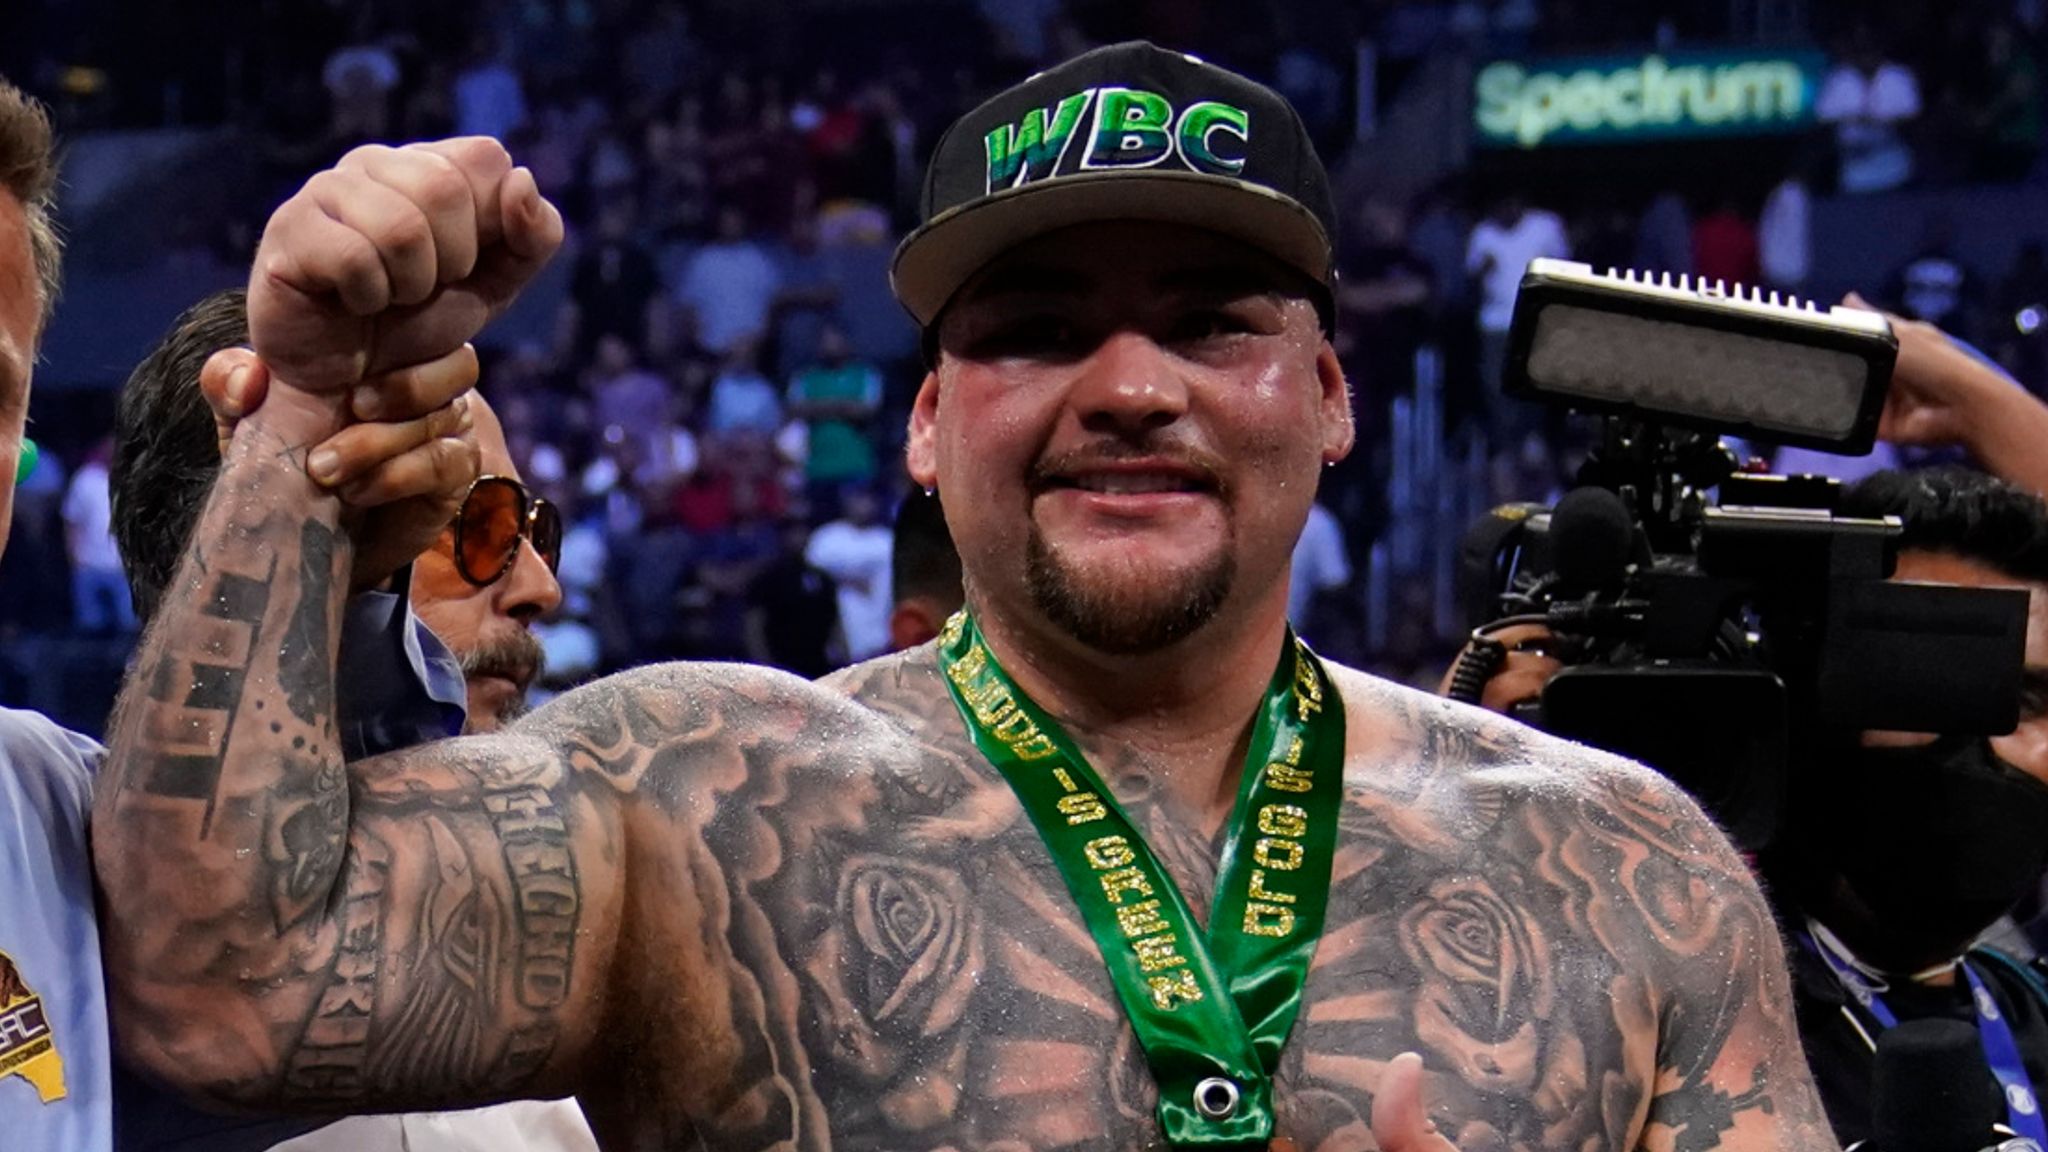 Andy Ruiz beats Luis Ortiz via unanimous decision after three knockdowns as Deontay Wilder welcomes all-American heavyweight clash Boxing News Sky Sports